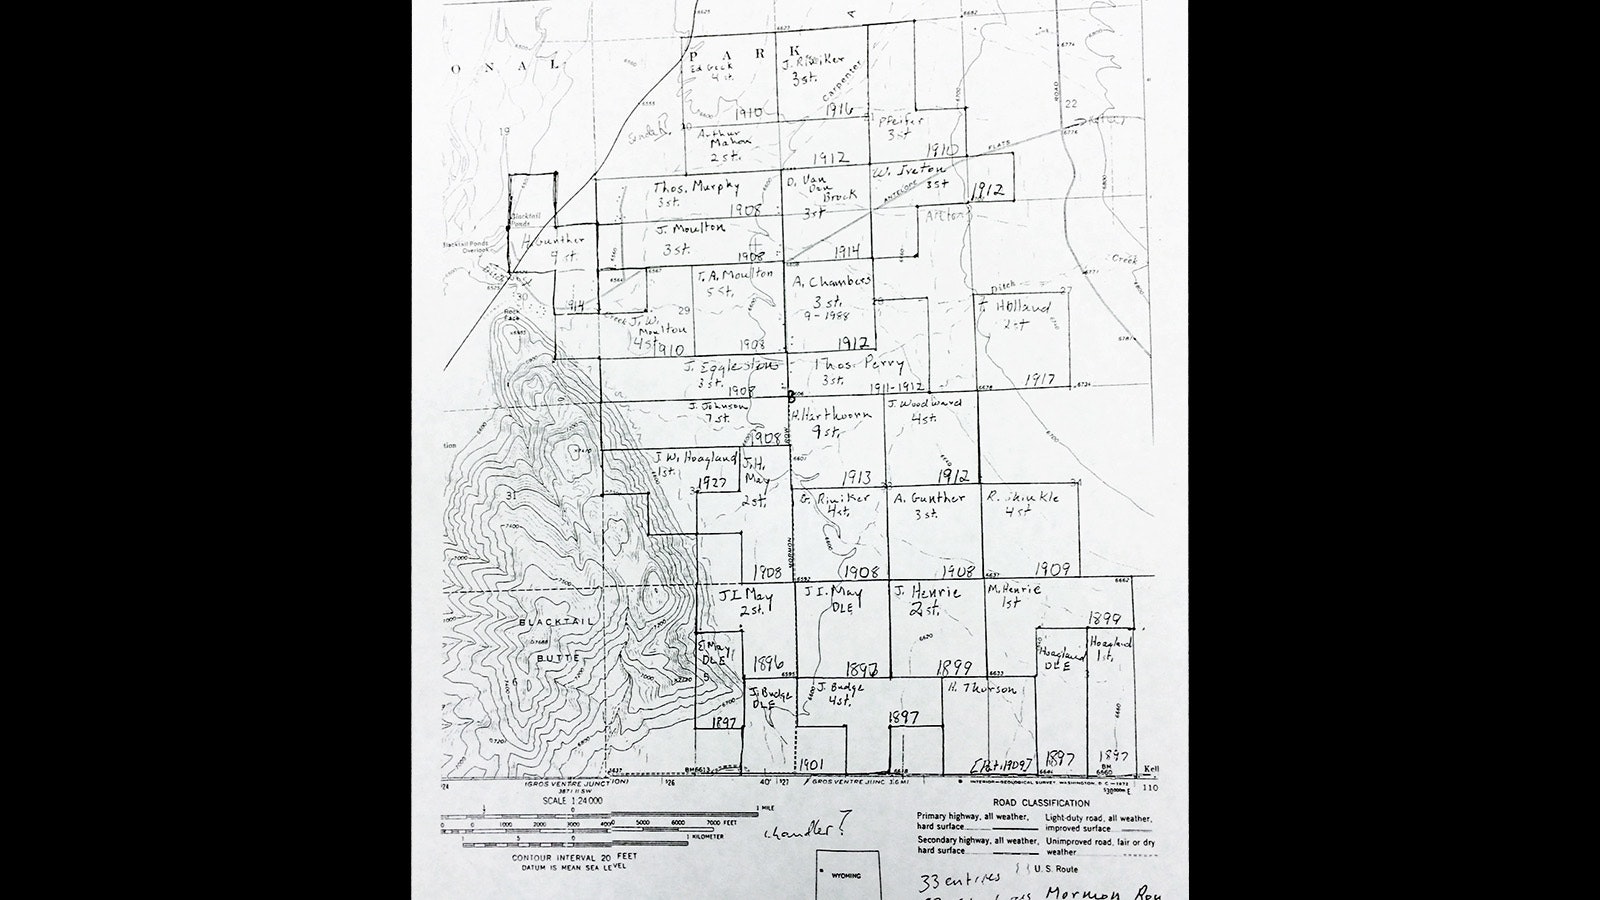 A survey map showing the layout of Mormon Row properties.